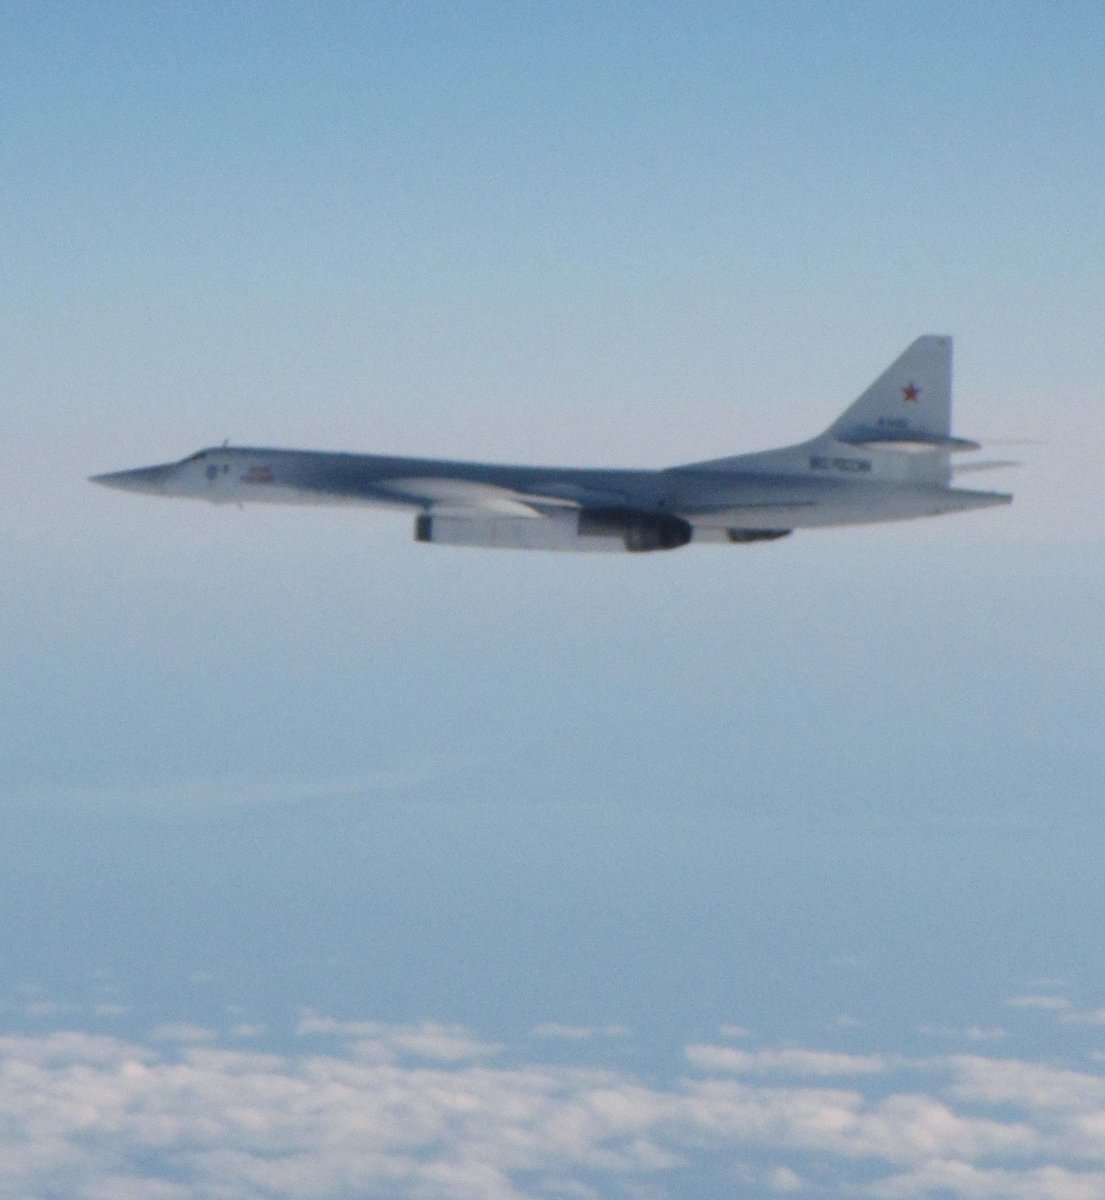  Live-armed Typhoons were scrambled early Wednesday morning from Leuchars Station in Fife to intercept two Russian Tu-160 Blackjack bombers operating near UK and  @NATO airspace. 2/ #QRA